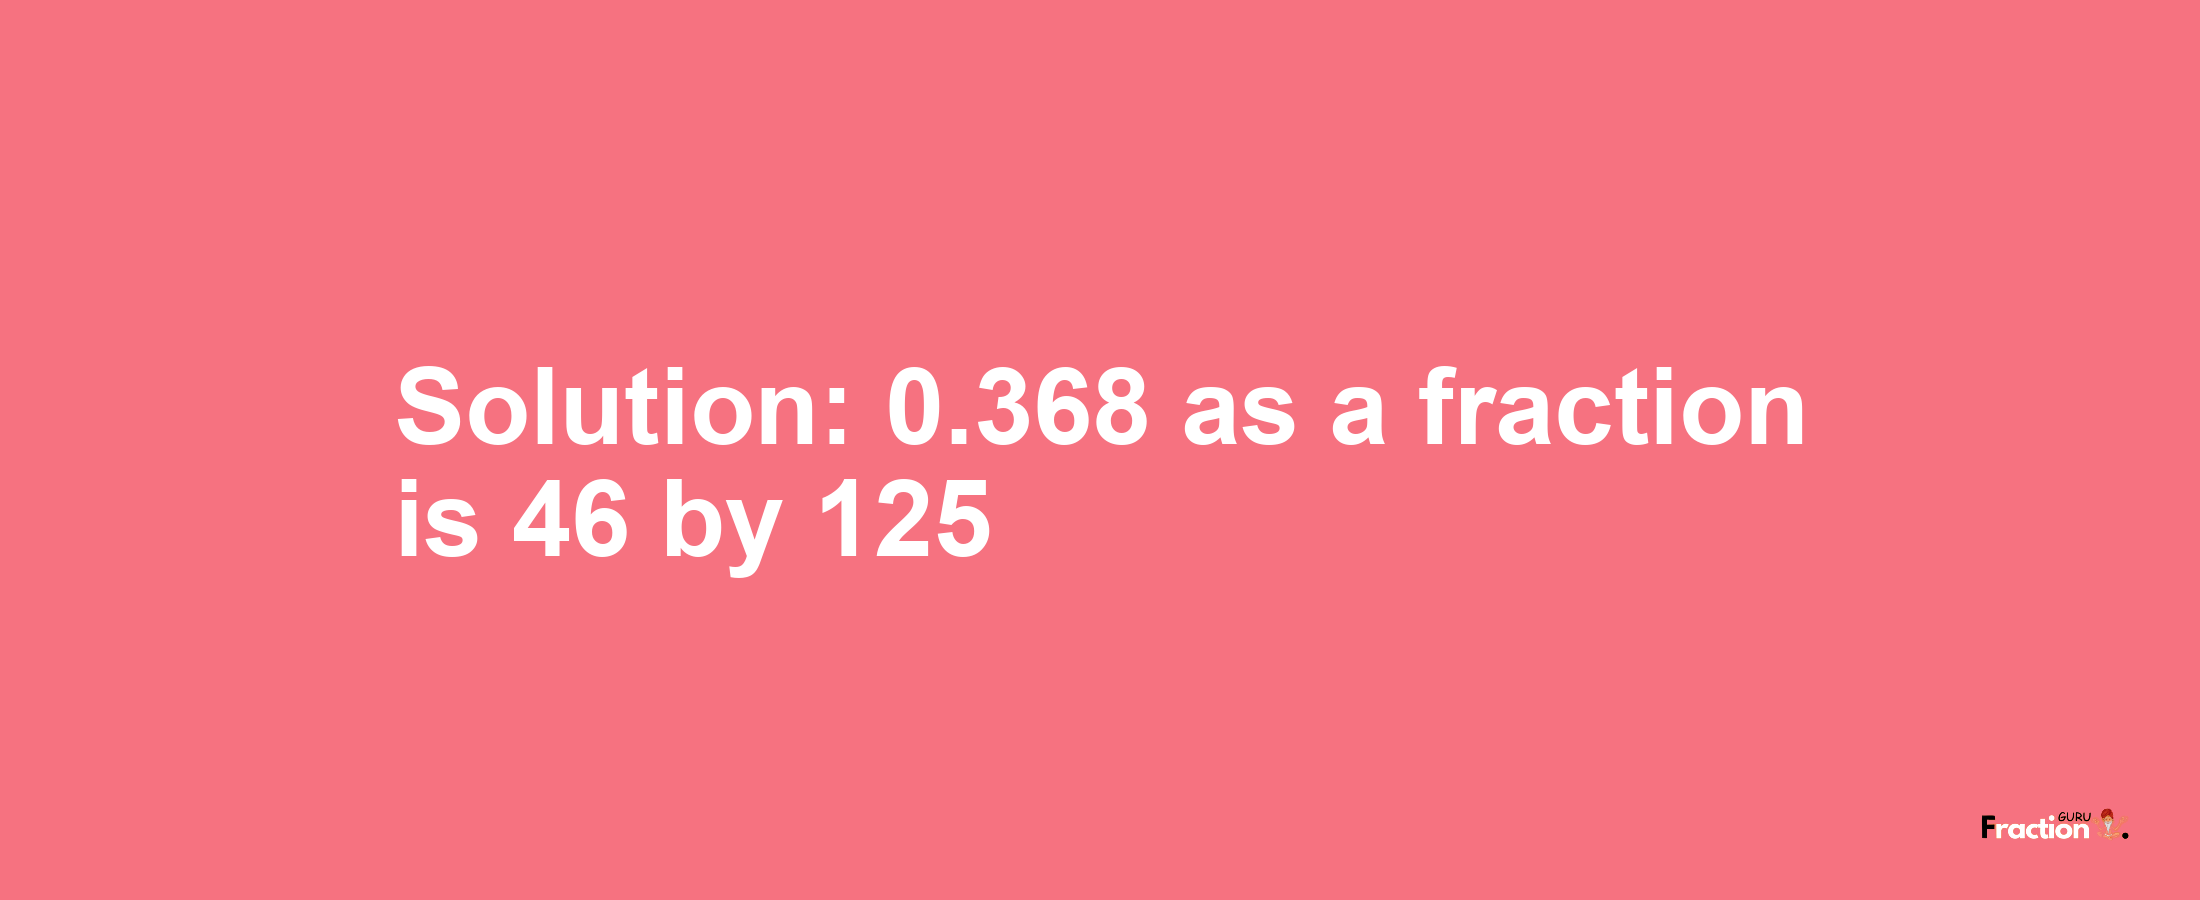 Solution:0.368 as a fraction is 46/125